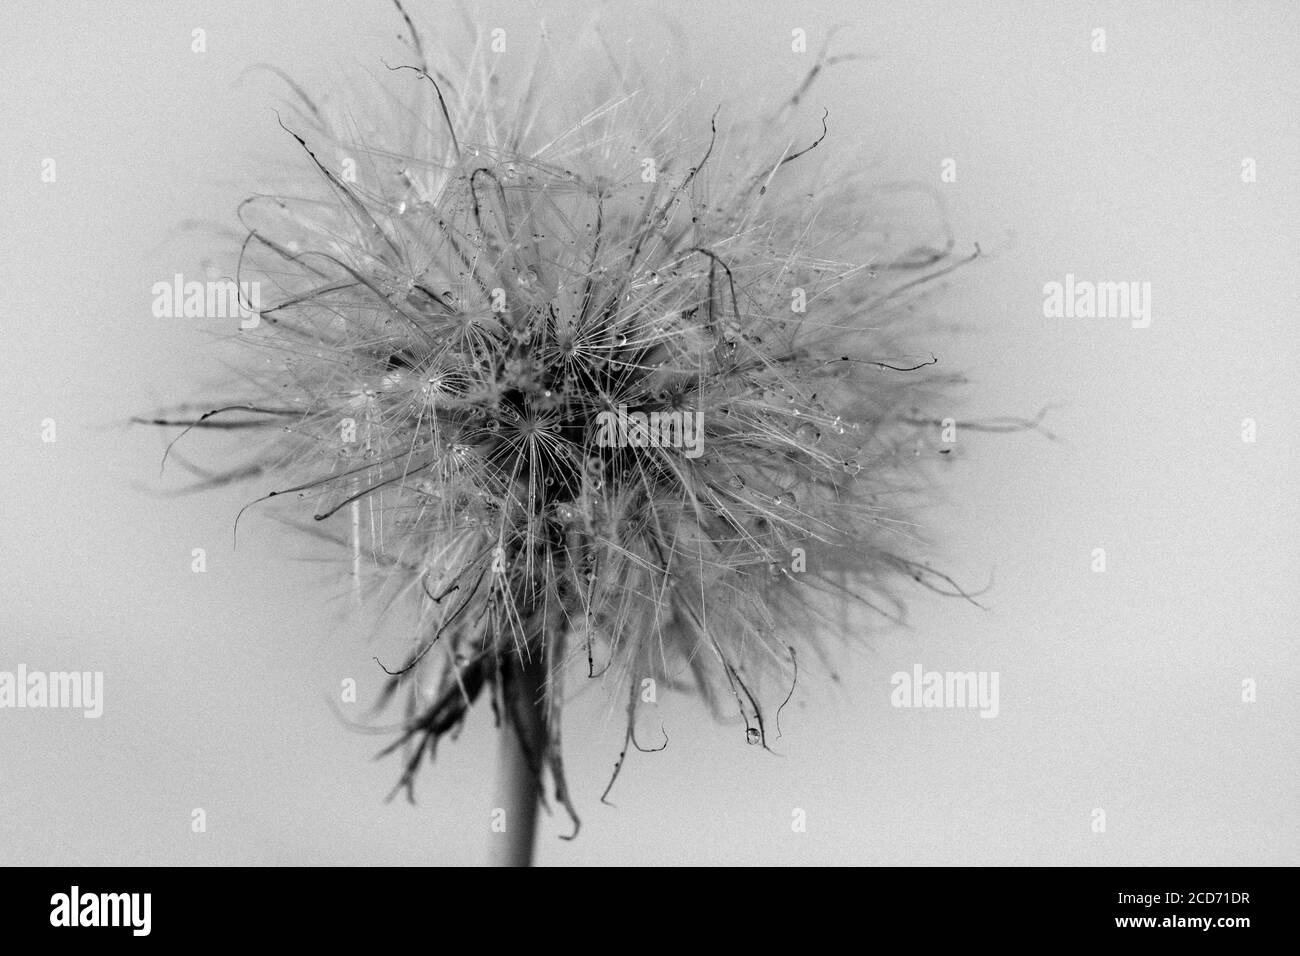 Dandelion seed head with water drops in black and white Stock Photo